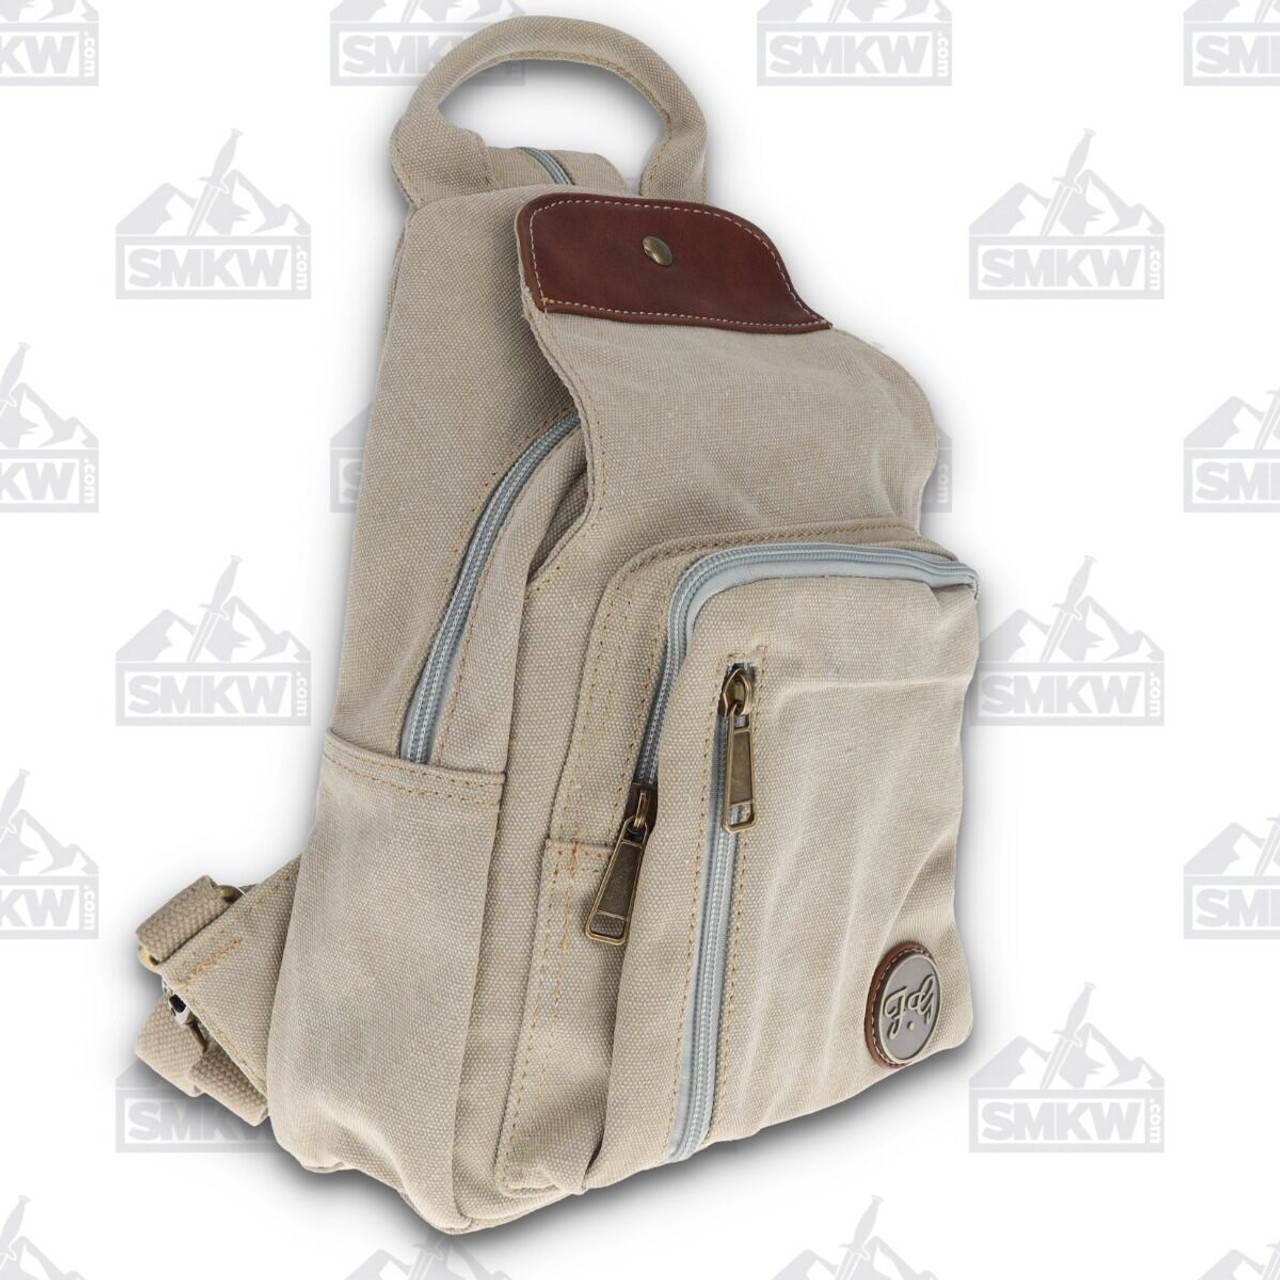 Fabigun Conceal Carry Sling/Backpack Light Brown - Smoky Mountain Knife  Works